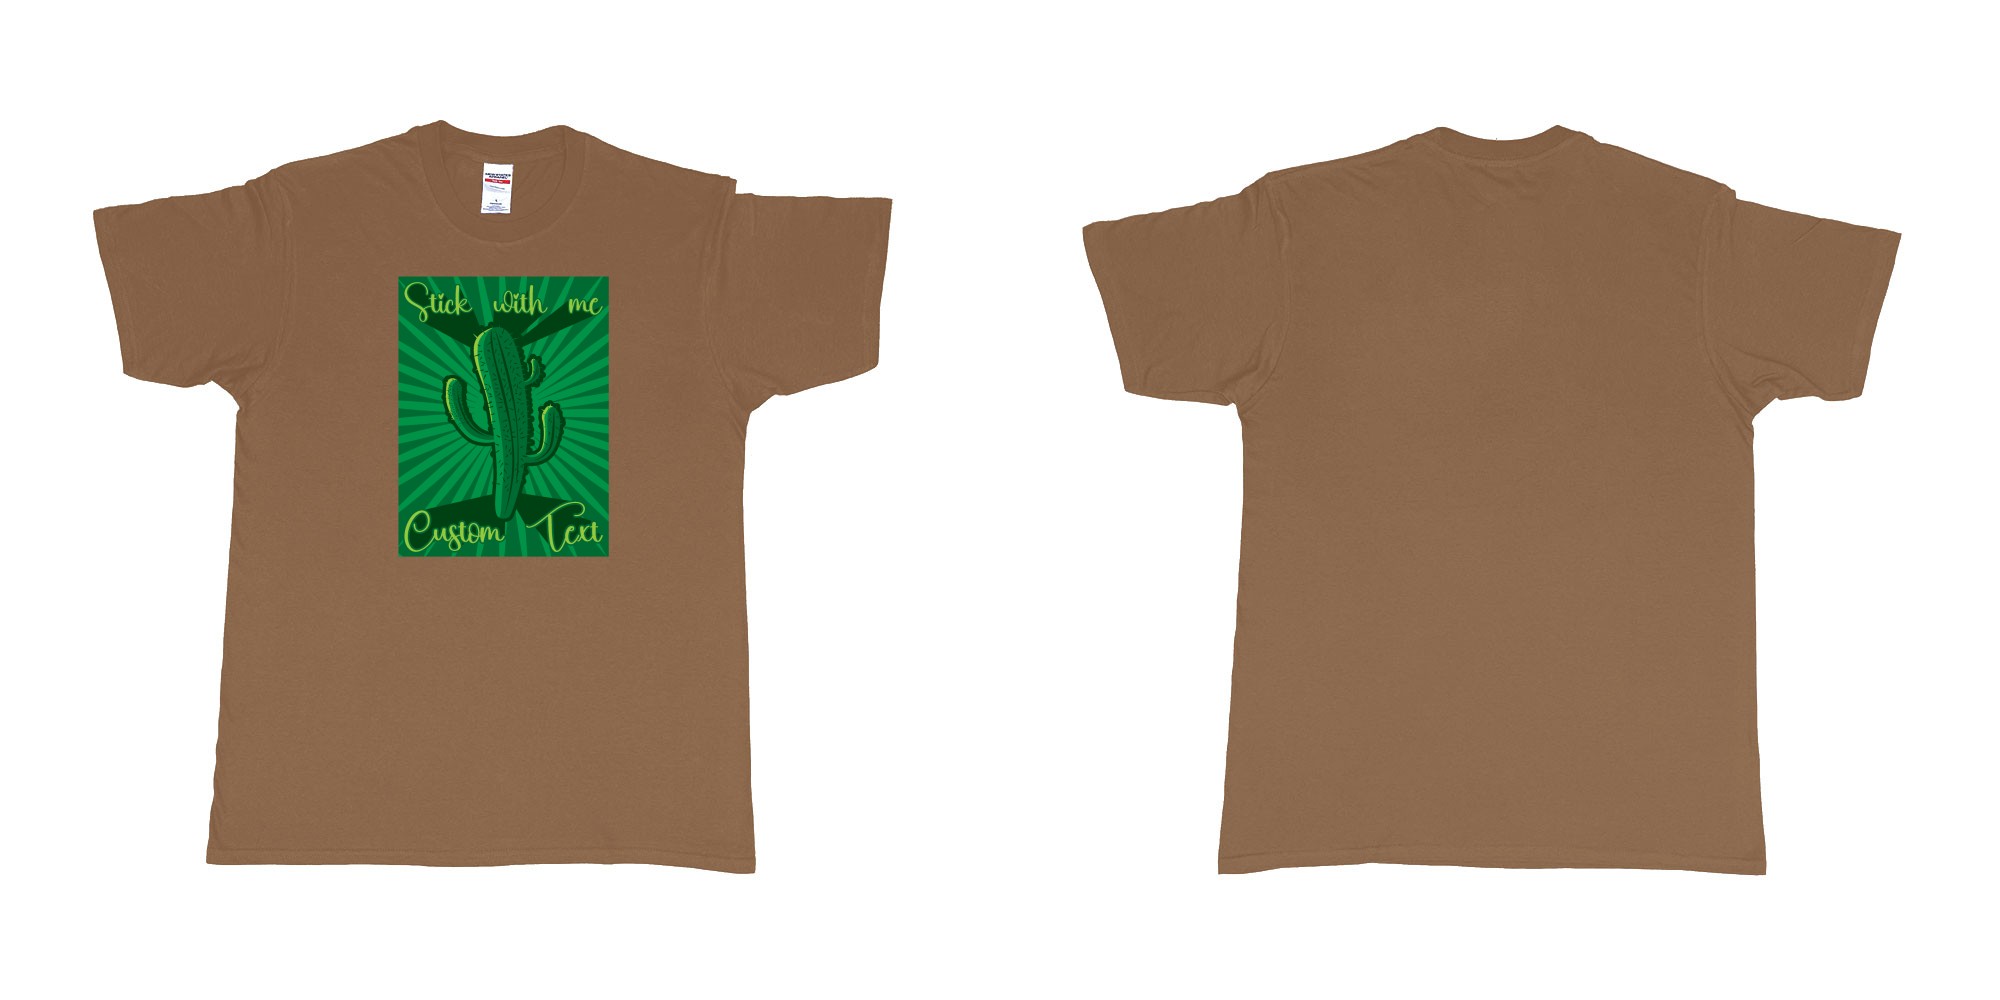 Custom tshirt design cactus stick with me in fabric color chestnut choice your own text made in Bali by The Pirate Way